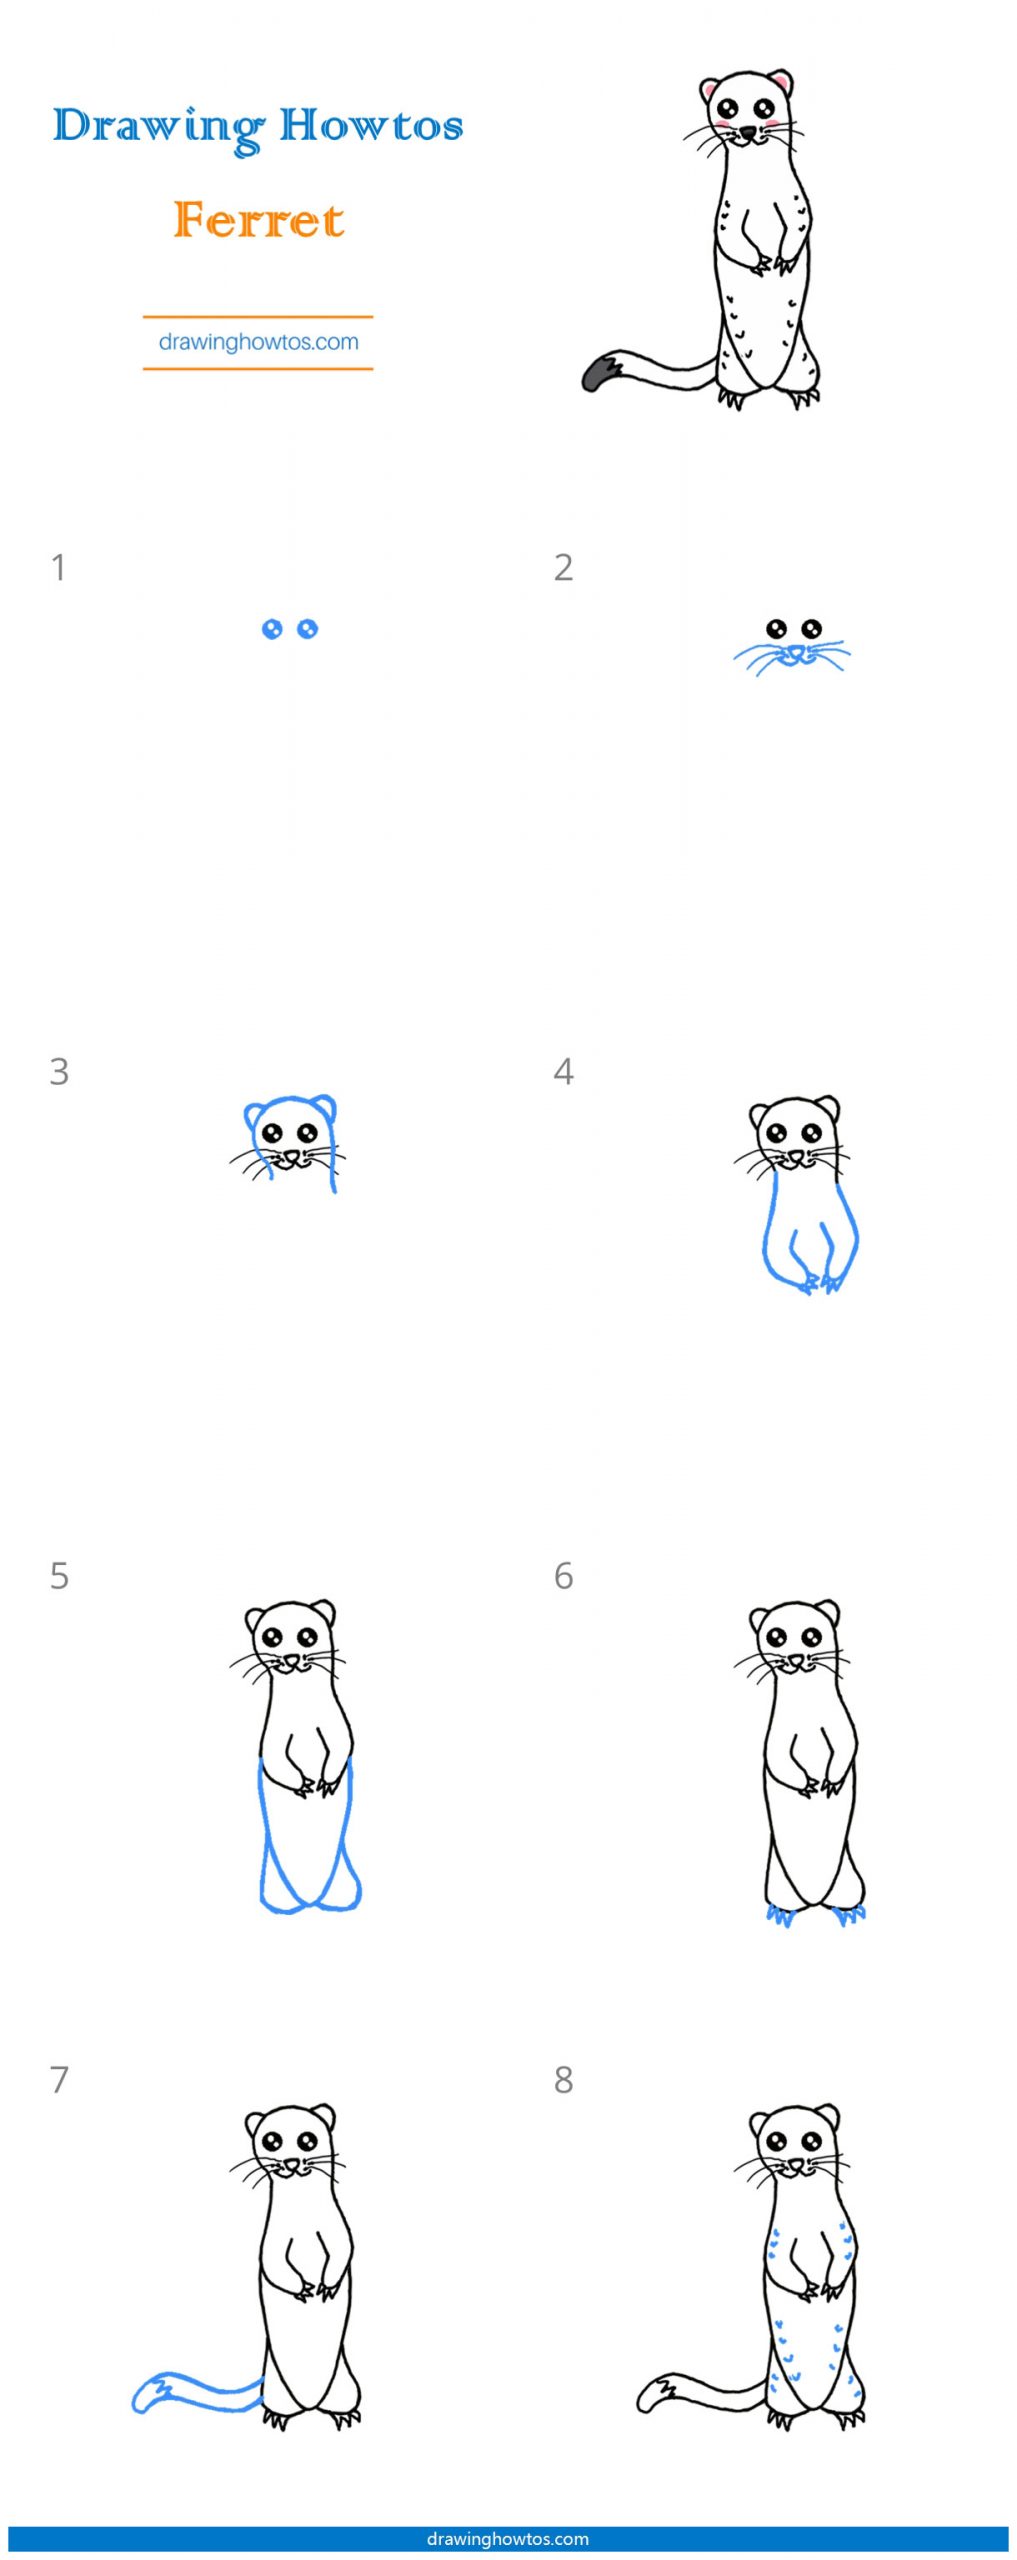 How to Draw a Ferret Step by Step